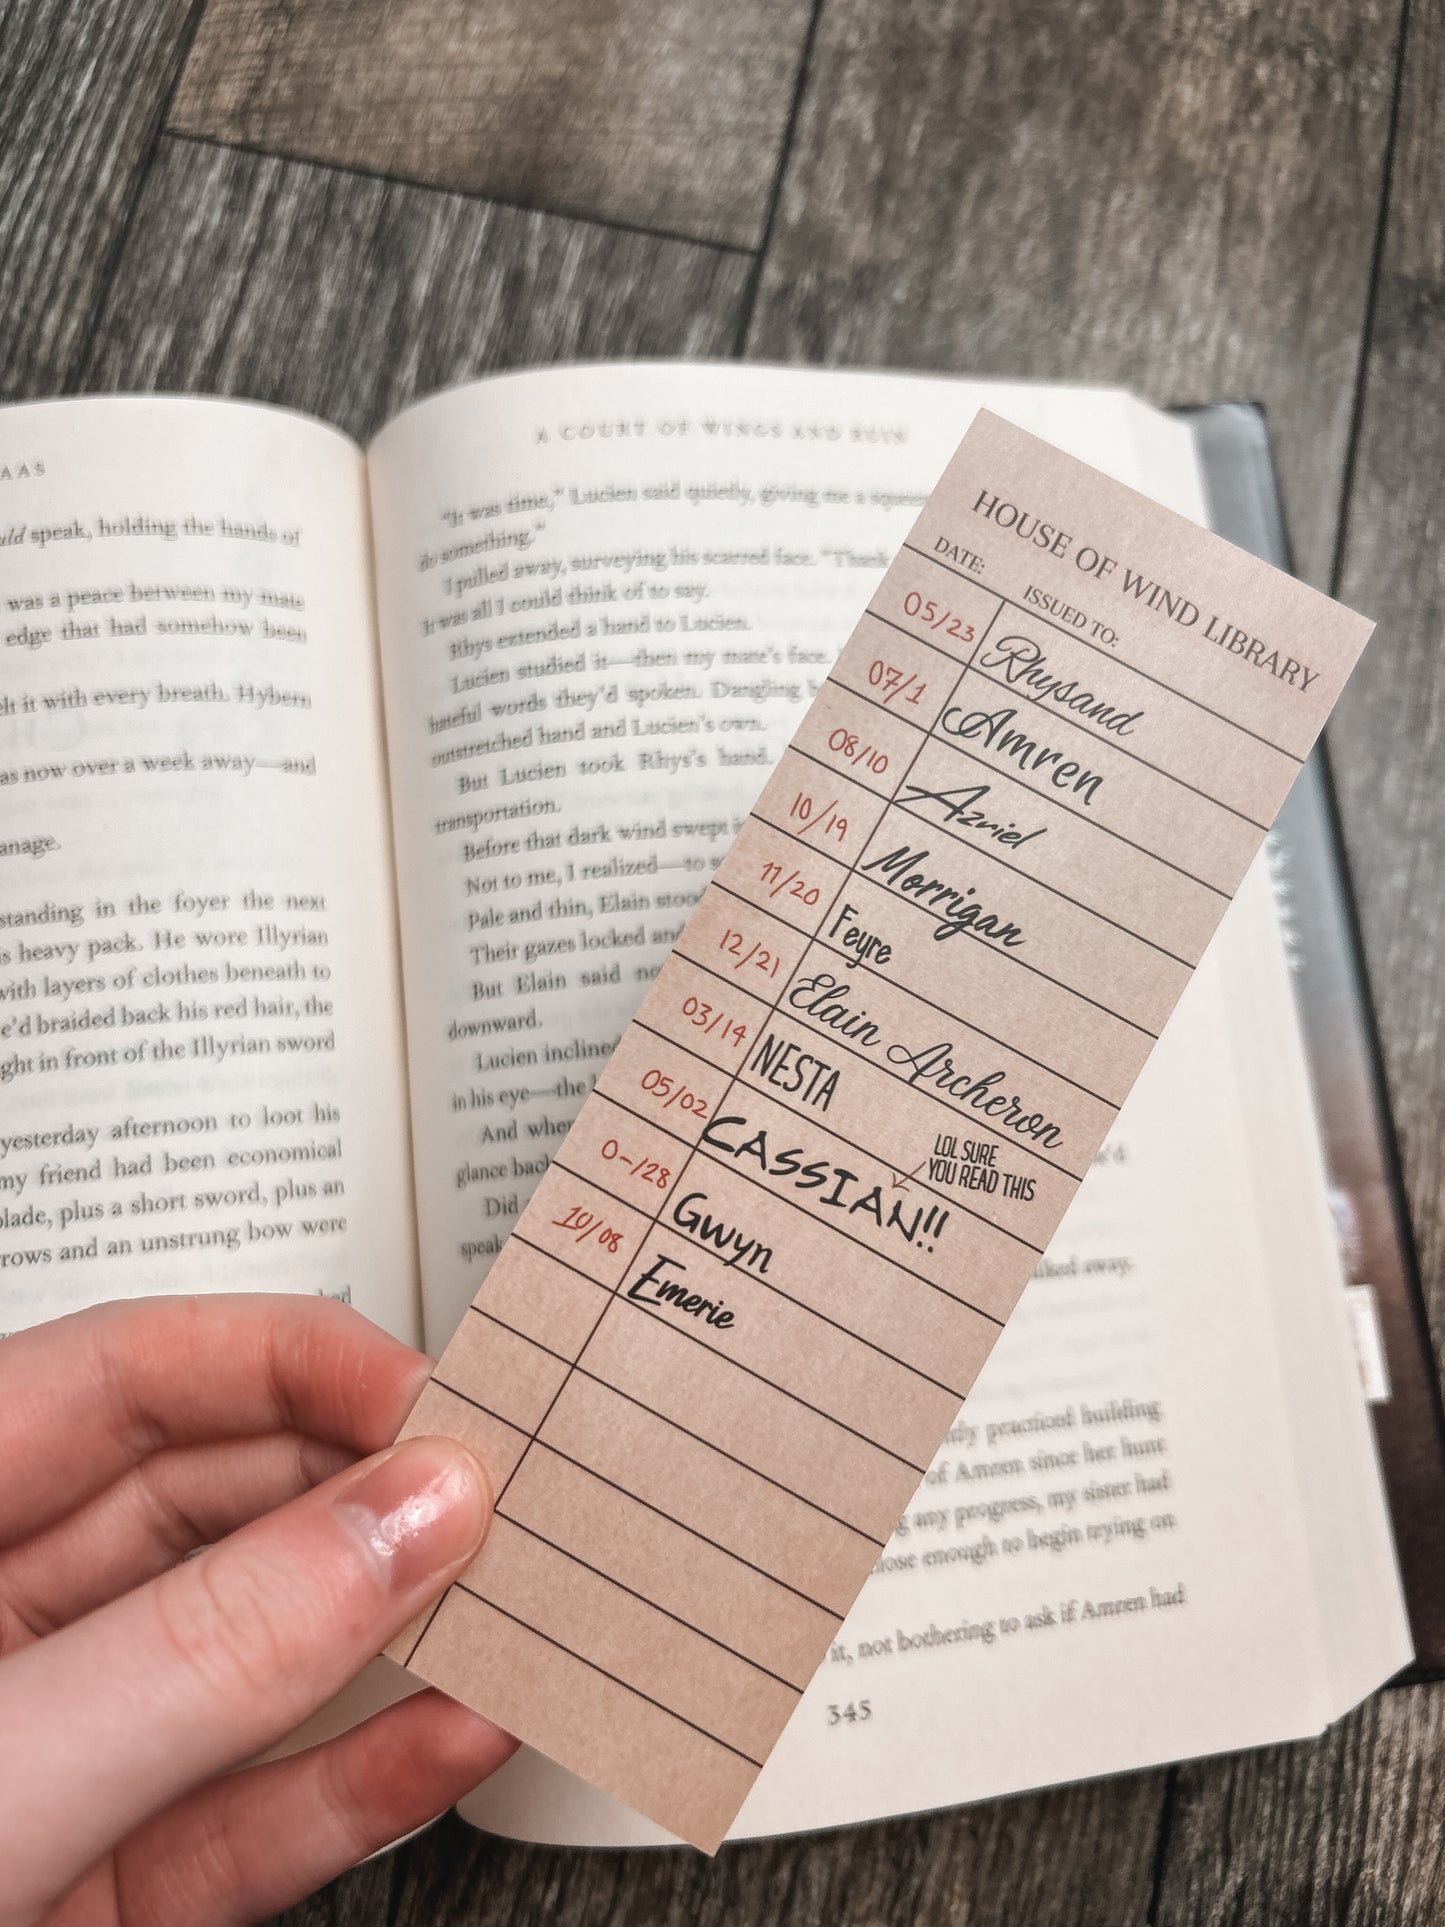 House of Wind “library card” bookmark